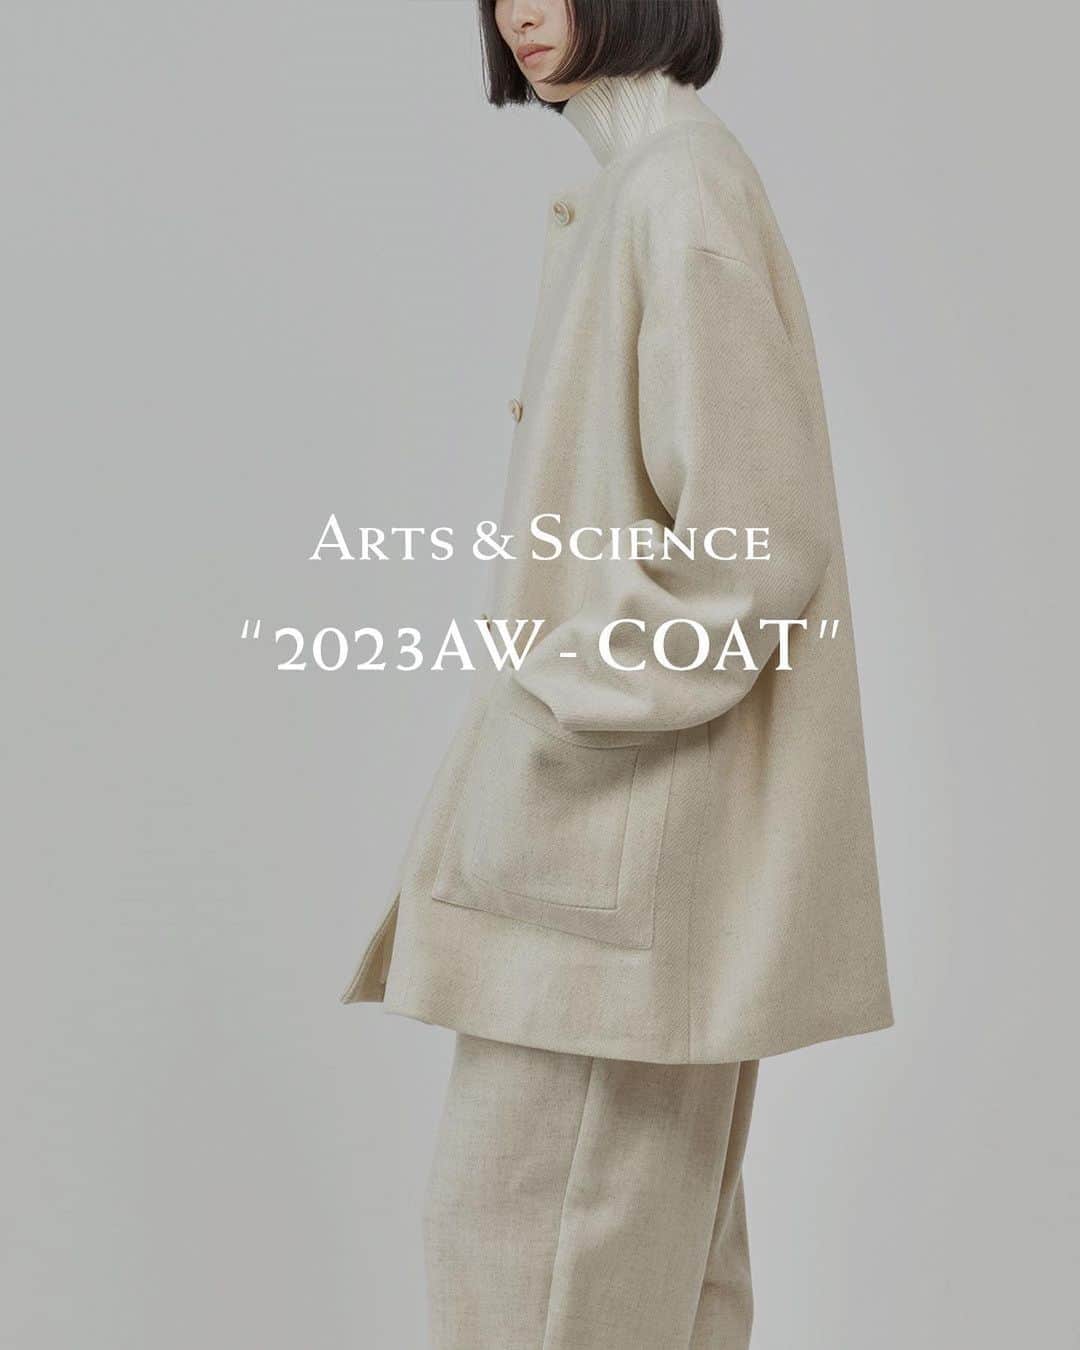 ARTS&SCIENCE official accountさんのインスタグラム写真 - (ARTS&SCIENCE official accountInstagram)「・ A&S “2023AW - COAT”  ARTS&SCIENCEの各ショップでは、これからの季節に活躍するコートをご紹介しています。ぜひ店頭でご覧ください。  [ STYLE 1 ] Frame pocket coat / ¥211,200 SHOP: A&S AOYAMA, A&S KYOTO, A&S FUKUOKA  [ STYLE 2 ] Ethnic line vest / ¥116,600 SHOP: A&S AOYAMA, A&S MARUNOUCHI, A&S KYOTO, A&S FUKUOKA  [ STYLE 3 ] Front pocket box coat 2 / ¥165,000 SHOP: A&S AOYAMA, A&S MARUNOUCHI, A&S KYOTO, A&S FUKUOKA  [ STYLE 4 ] Quilt combi light coat short/ ¥162,800 SHOP: A&S AOYAMA, A&S MARUNOUCHI, A&S KYOTO, A&S FUKUOKA  @arts_and_science  入荷日はアイテムにより異なります。すべてのアイテムは通信販売も承っております。商品についてのお問い合わせは店舗、またはWEBサイトのコンタクトフォームよりご連絡ください。 Launch dates will vary per item. For item requests and direct mail orders, please contact our shops directly or use our contact form from our official web page.  Photos by @kousuke_ichikawa  #artsandscience_window #artsandscience」11月9日 19時00分 - arts_and_science